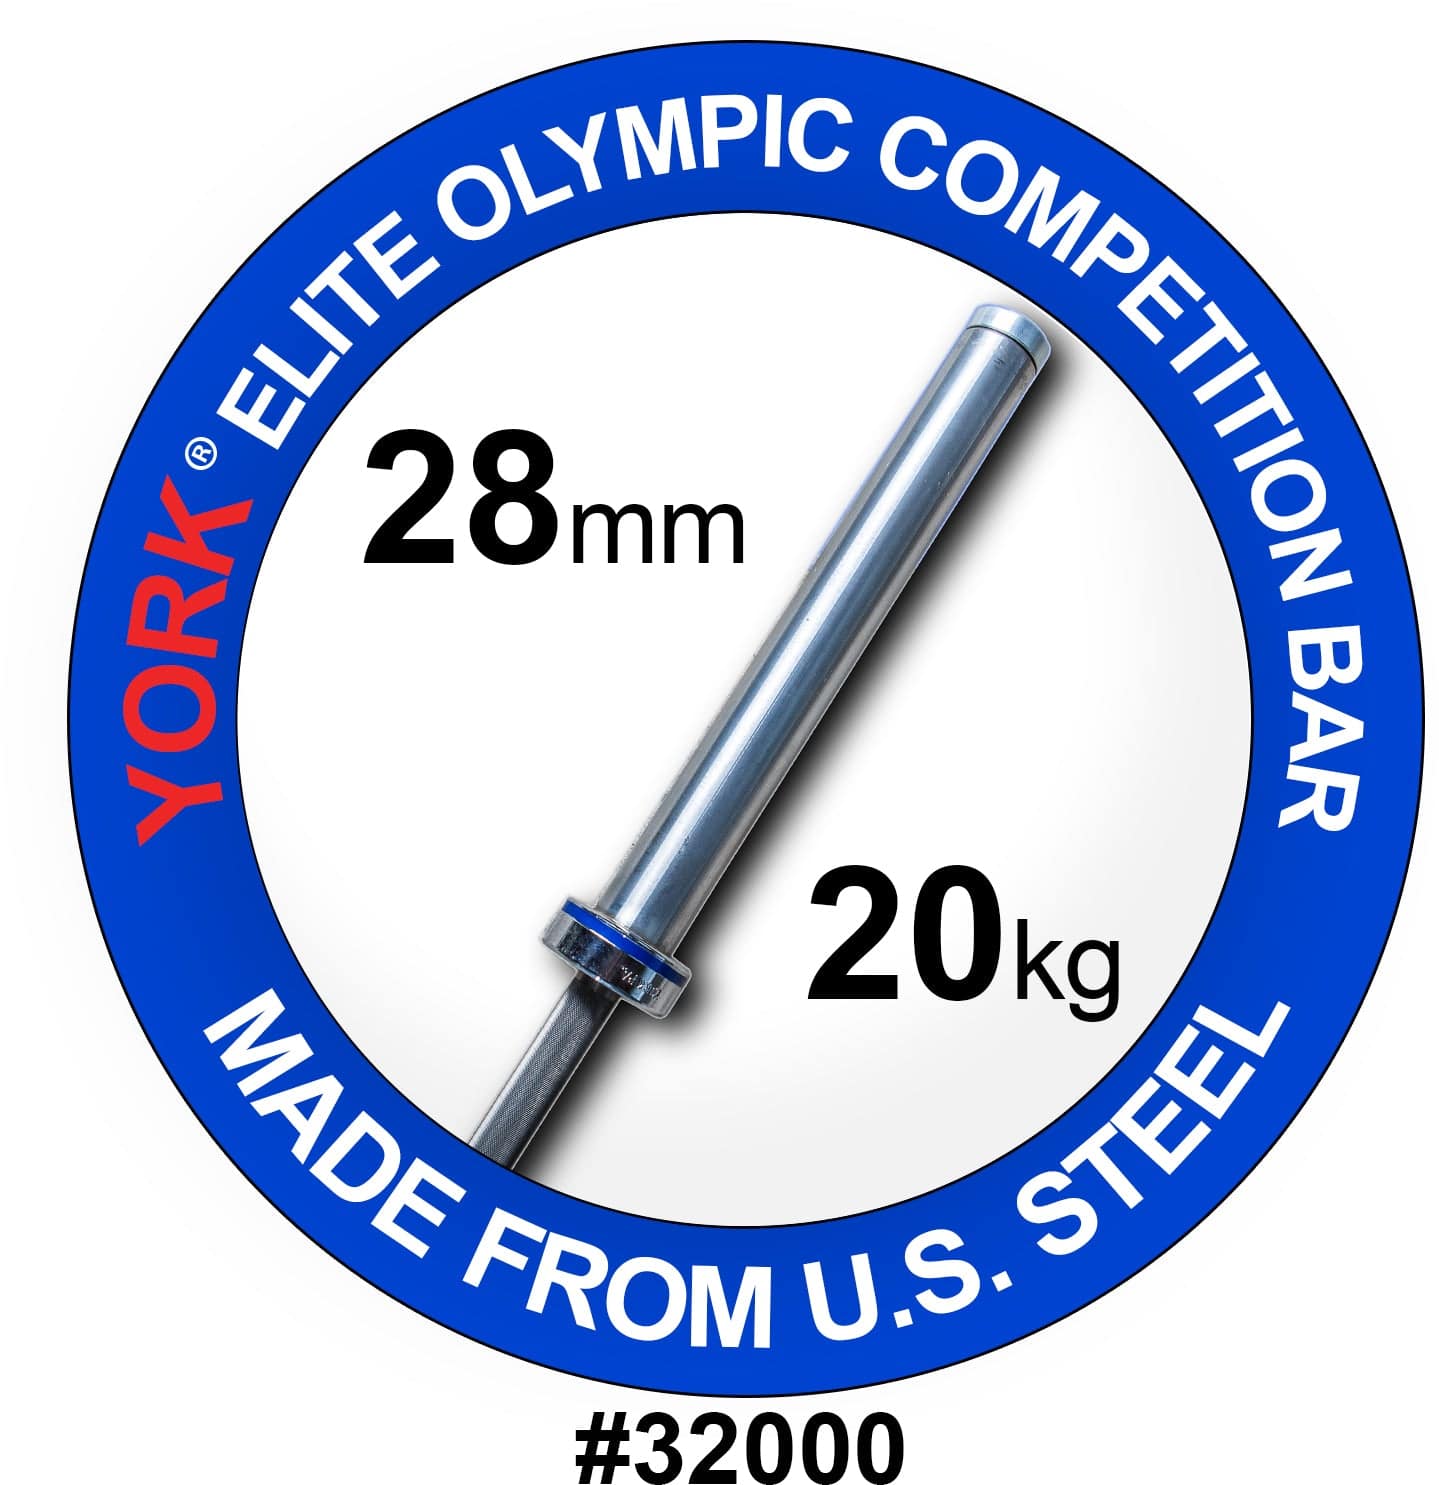 York Barbell | Men's Elite Competition Olympic Bar - XTC Fitness - Exercise Equipment Superstore - Canada - Olympic Lifting Barbell